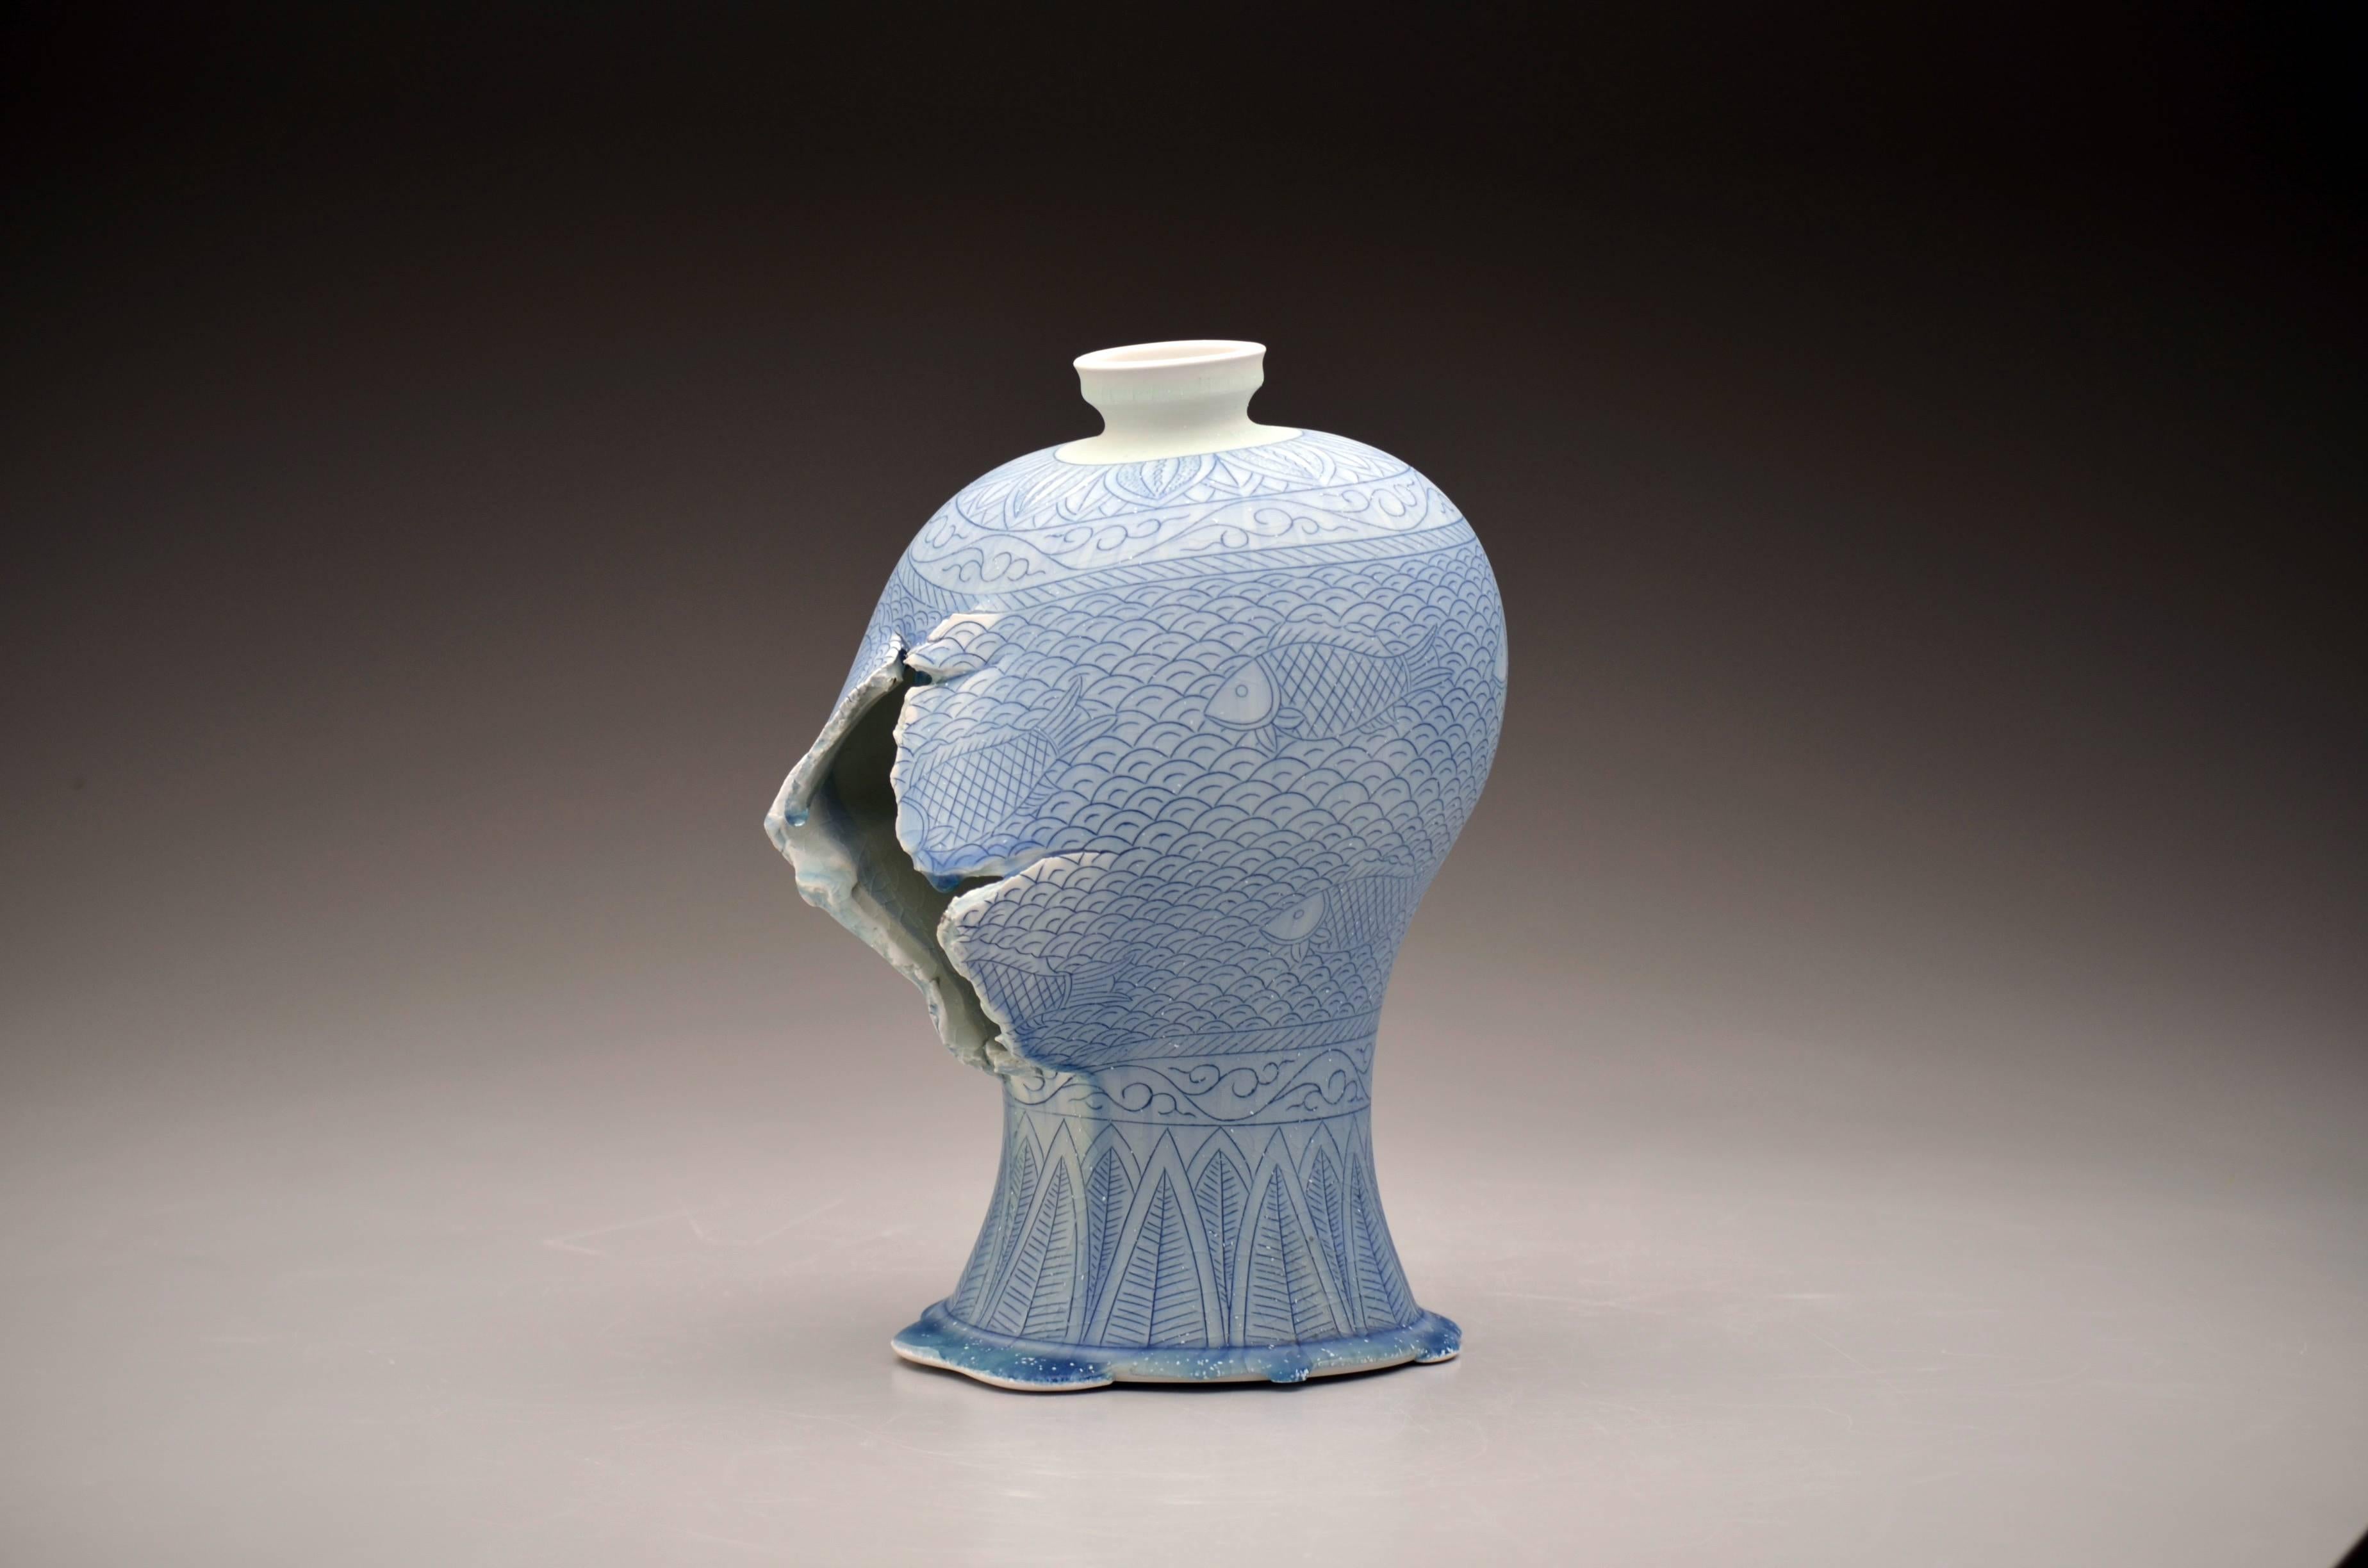 Dimensions: 14&quot; x 10&quot; x 9&quot;
Materials: Porcelain, Cobalt Inlay, Glaze

Steven's work combines wonderfully elegant porcelain forms referencing traditional ceramic objects with deconstructed sculptural brilliance that is both surprising